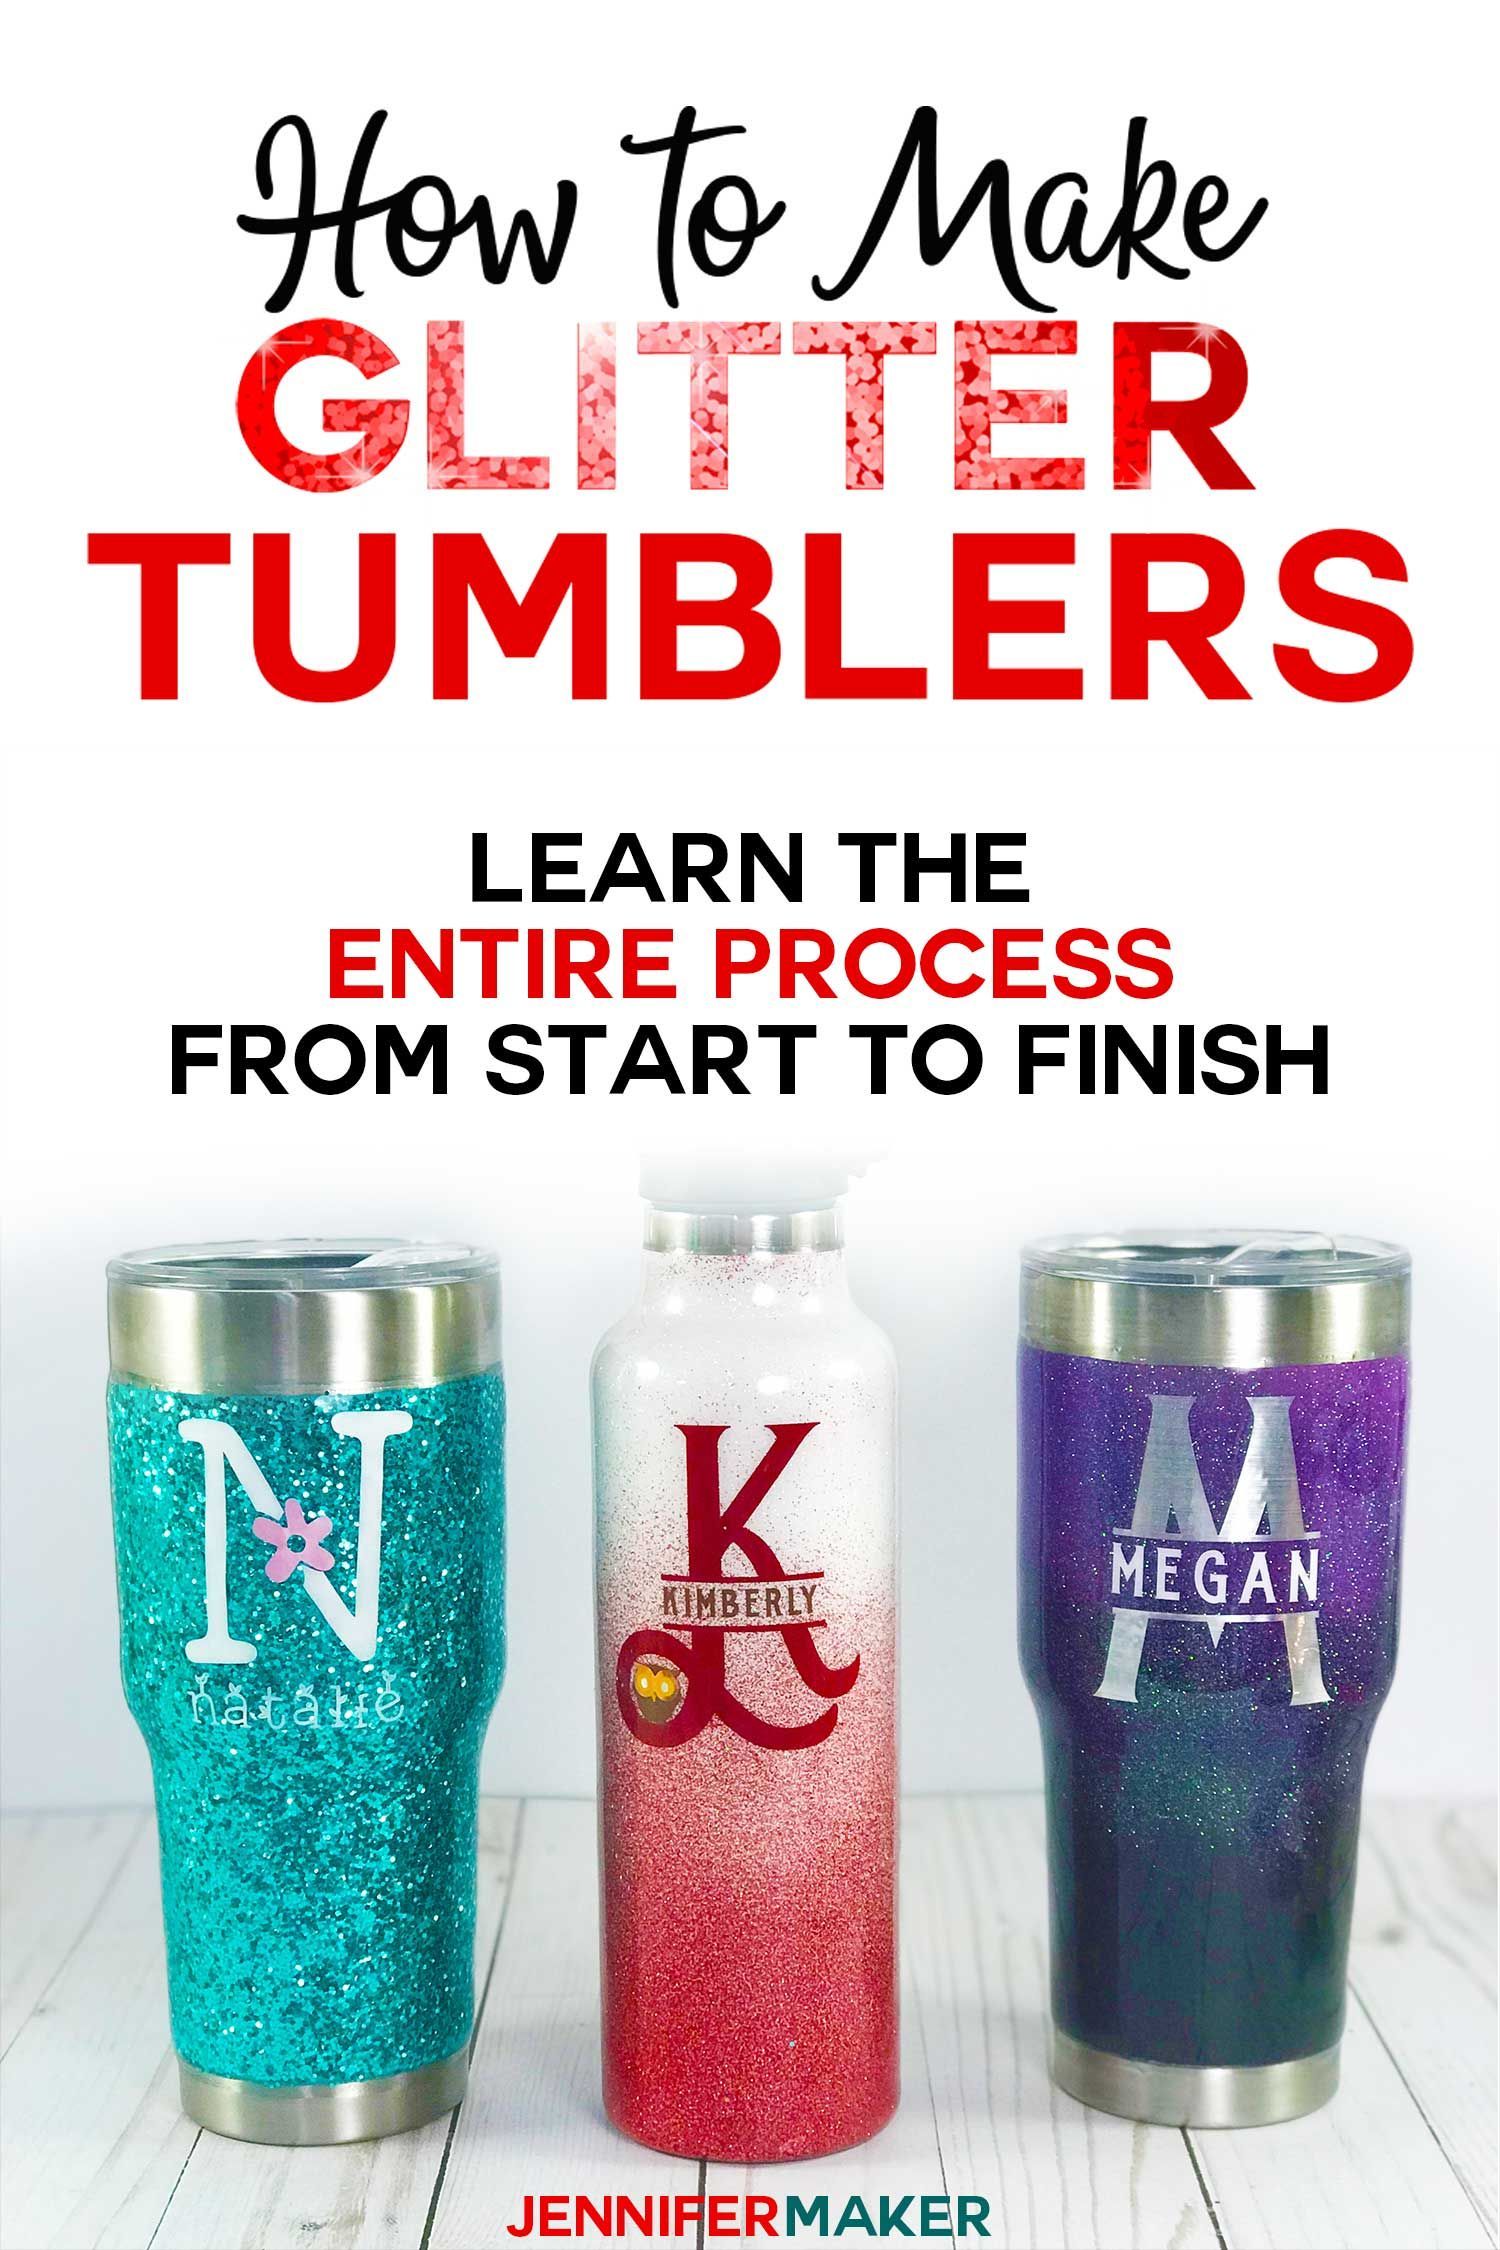 DIY Glitter Tumblers - Step-by-Step Photos & Video Tutorial -   17 diy projects For Teen Girls crafts ideas